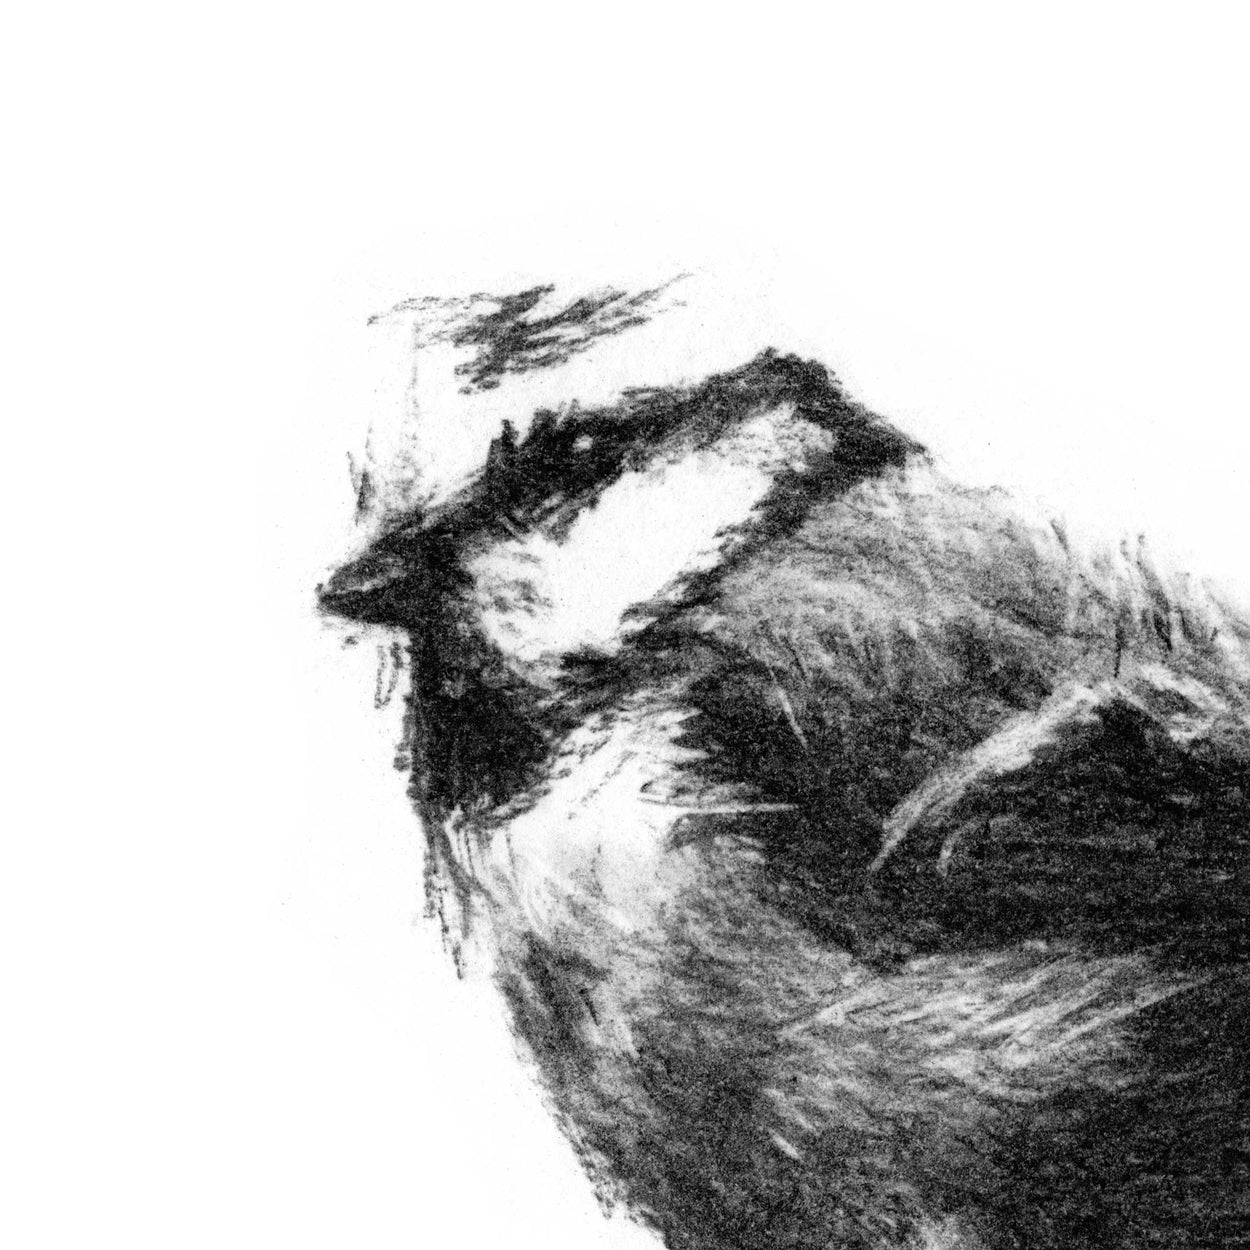 close-up detail of charcoal drawing of a small bird